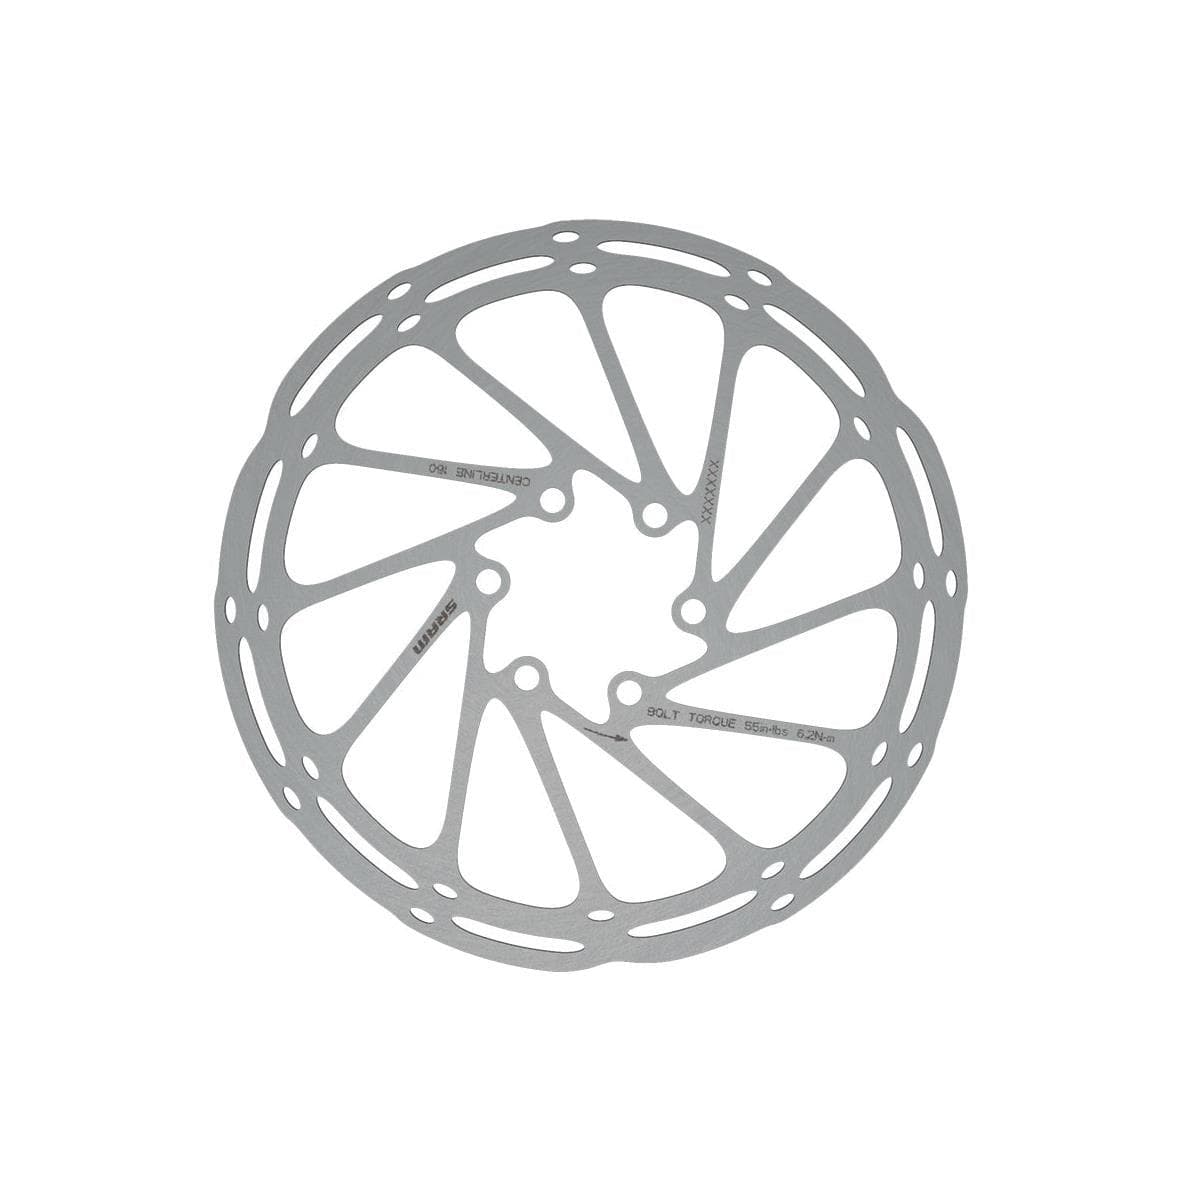 Sram Rotor - Centerline Rounded (Includes Steel Rotor Bolts):  200Mm